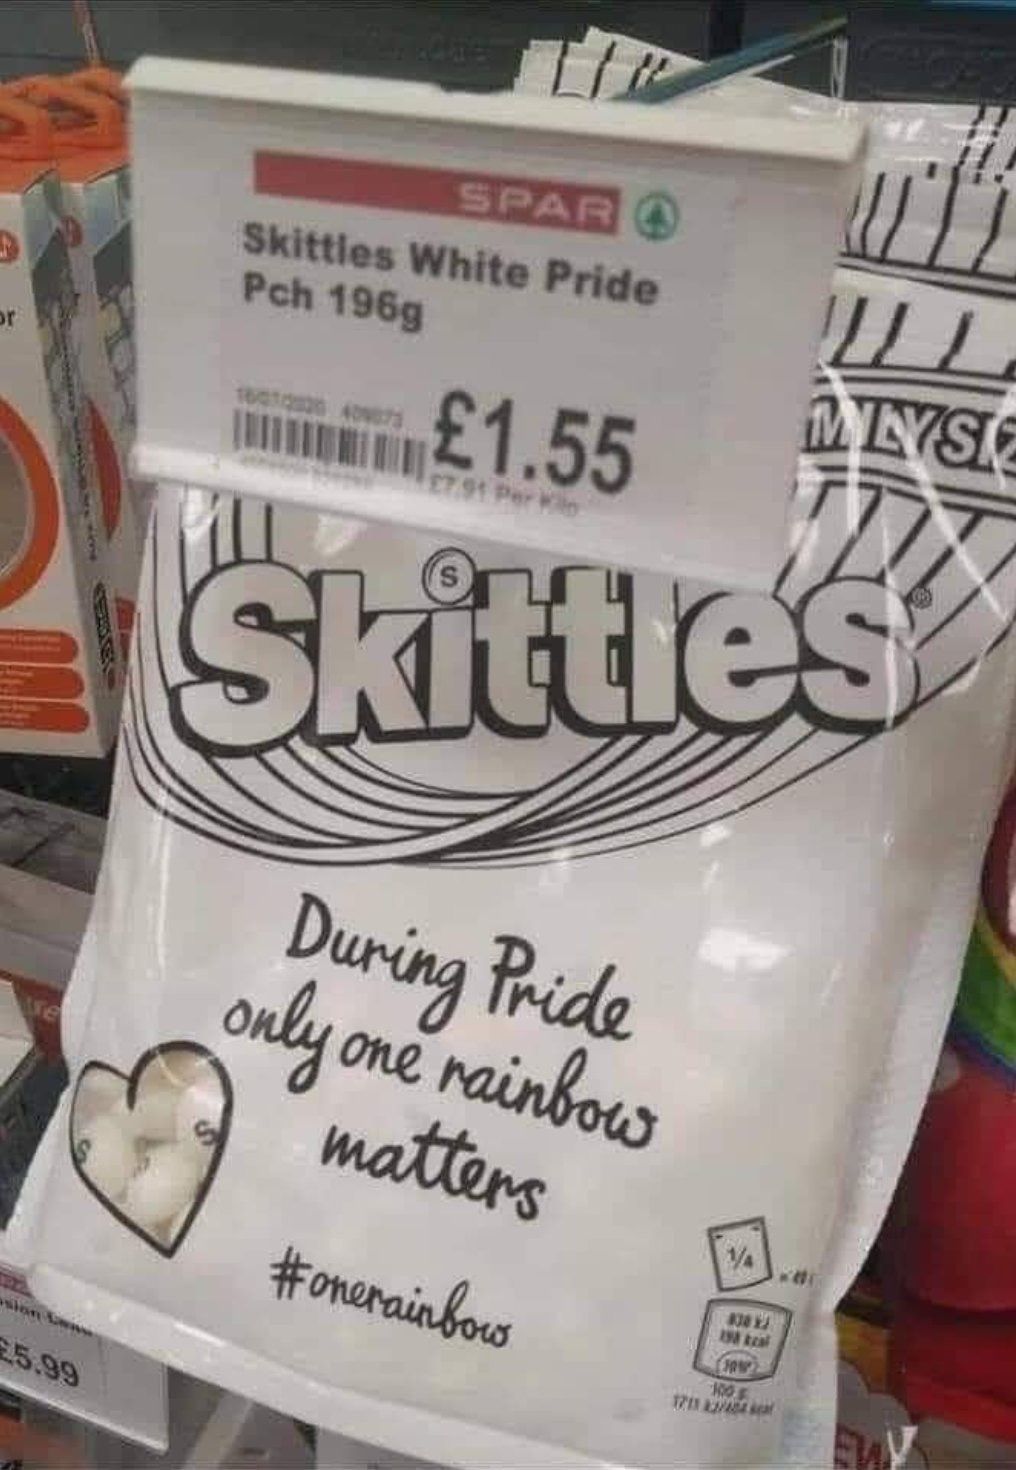 I think Skittles tried to do something positive but missed the mark